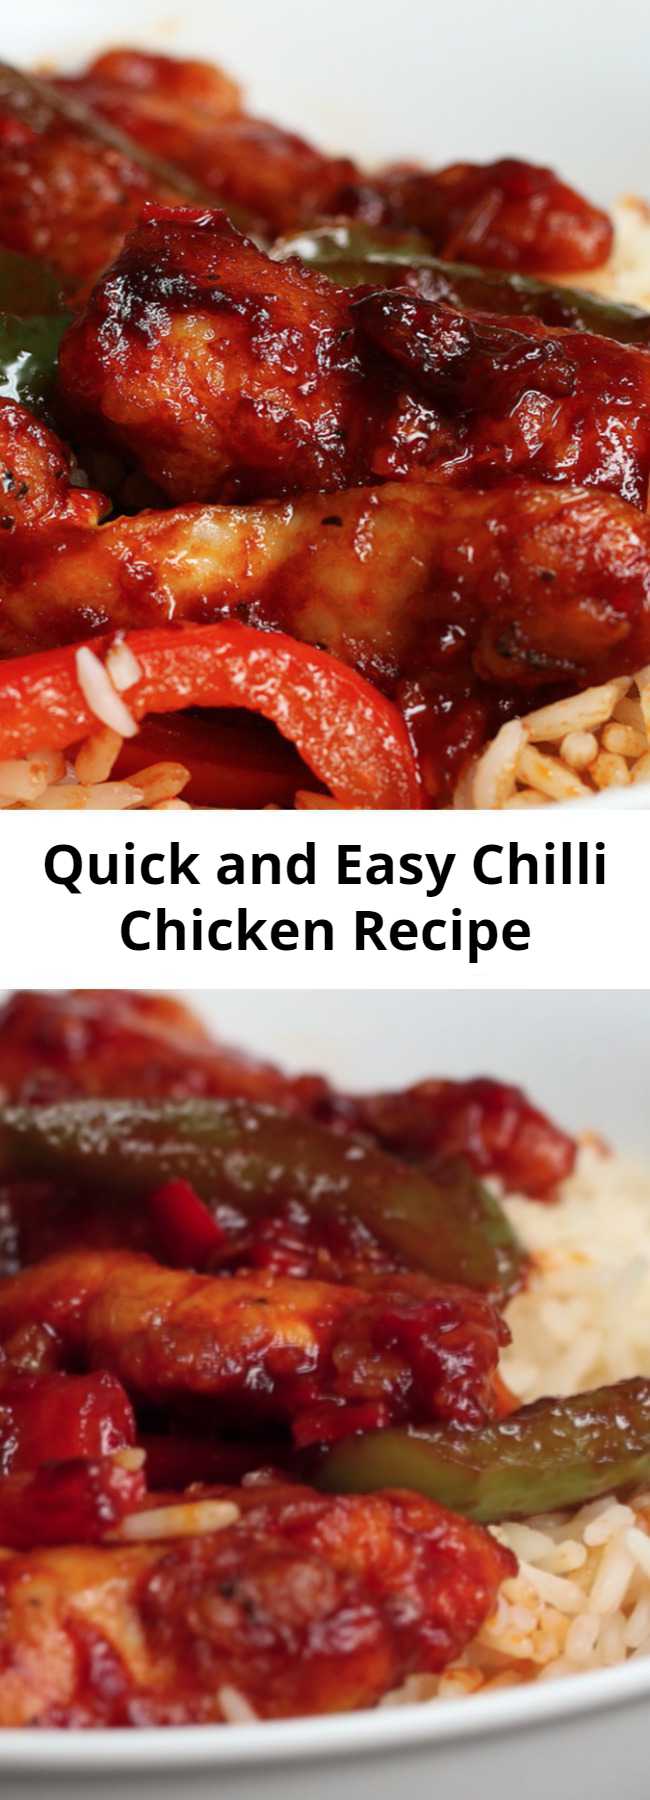 Quick and Easy Chilli Chicken Recipe - Nicer than takeaway Chinese, so good especially with sweet chilli sauce.